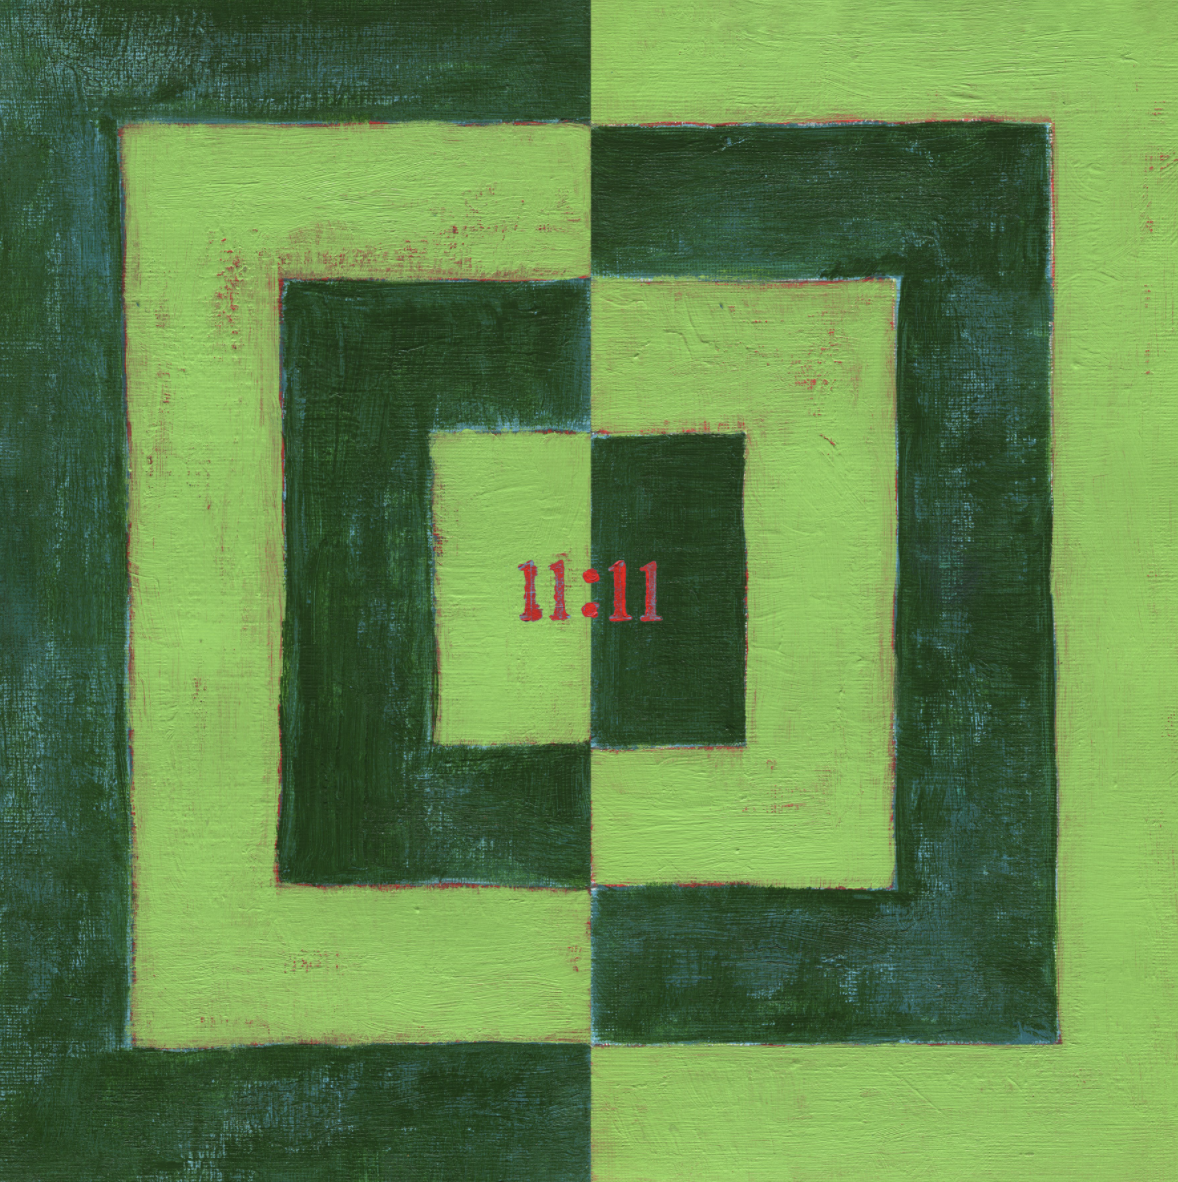 11." Dark and light green geometric shapes mirror one another.